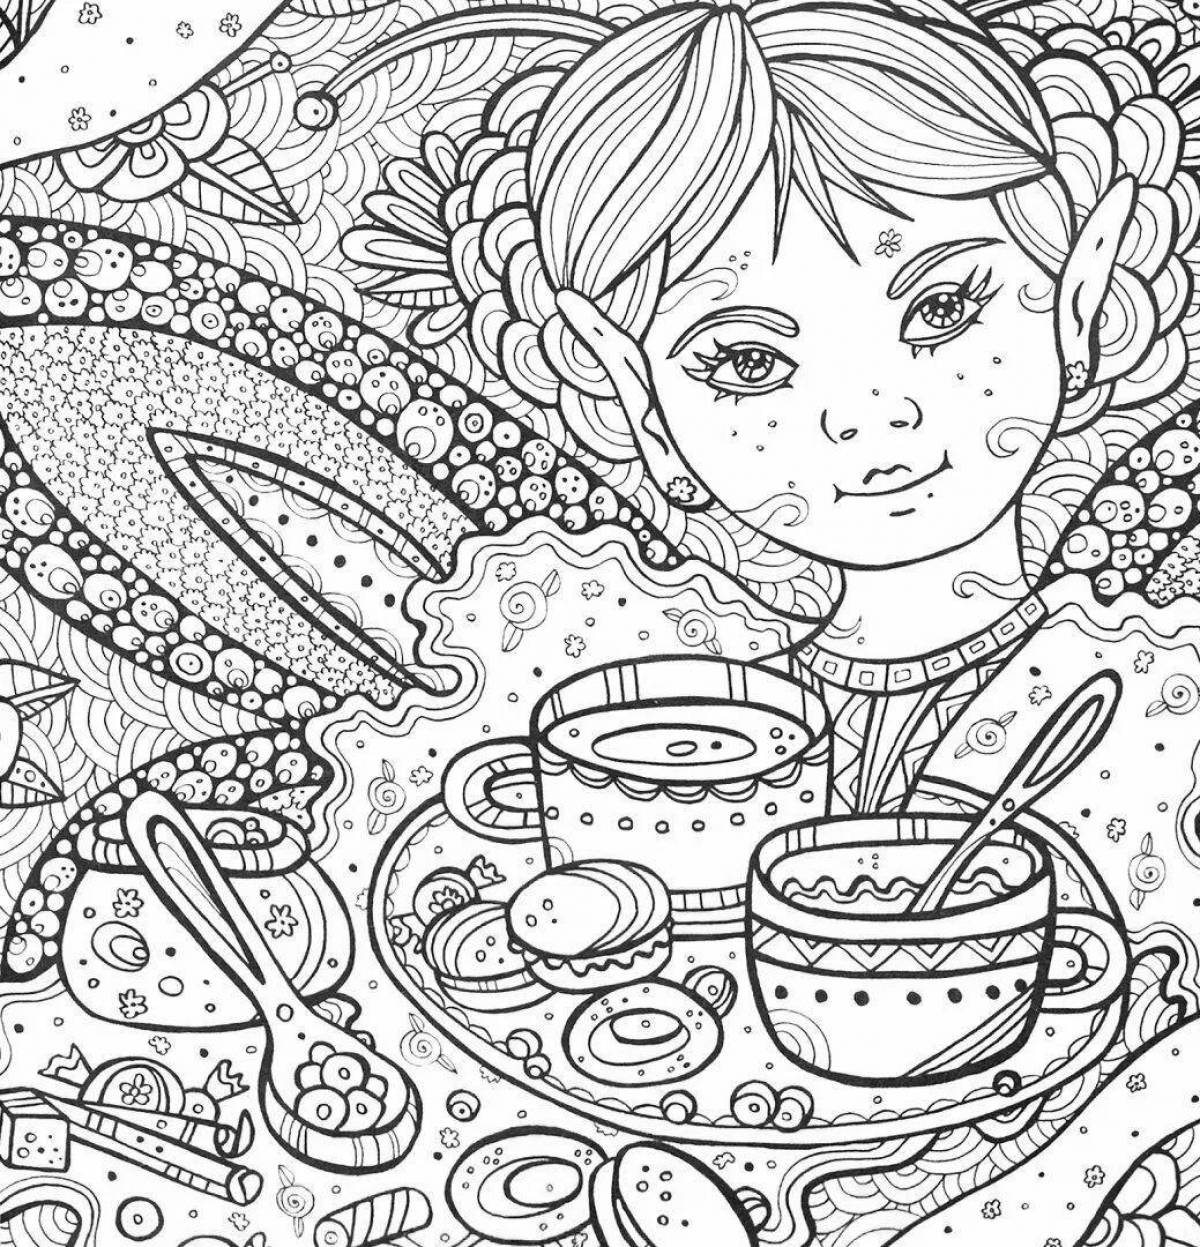 Great coloring book for girls 10 years old